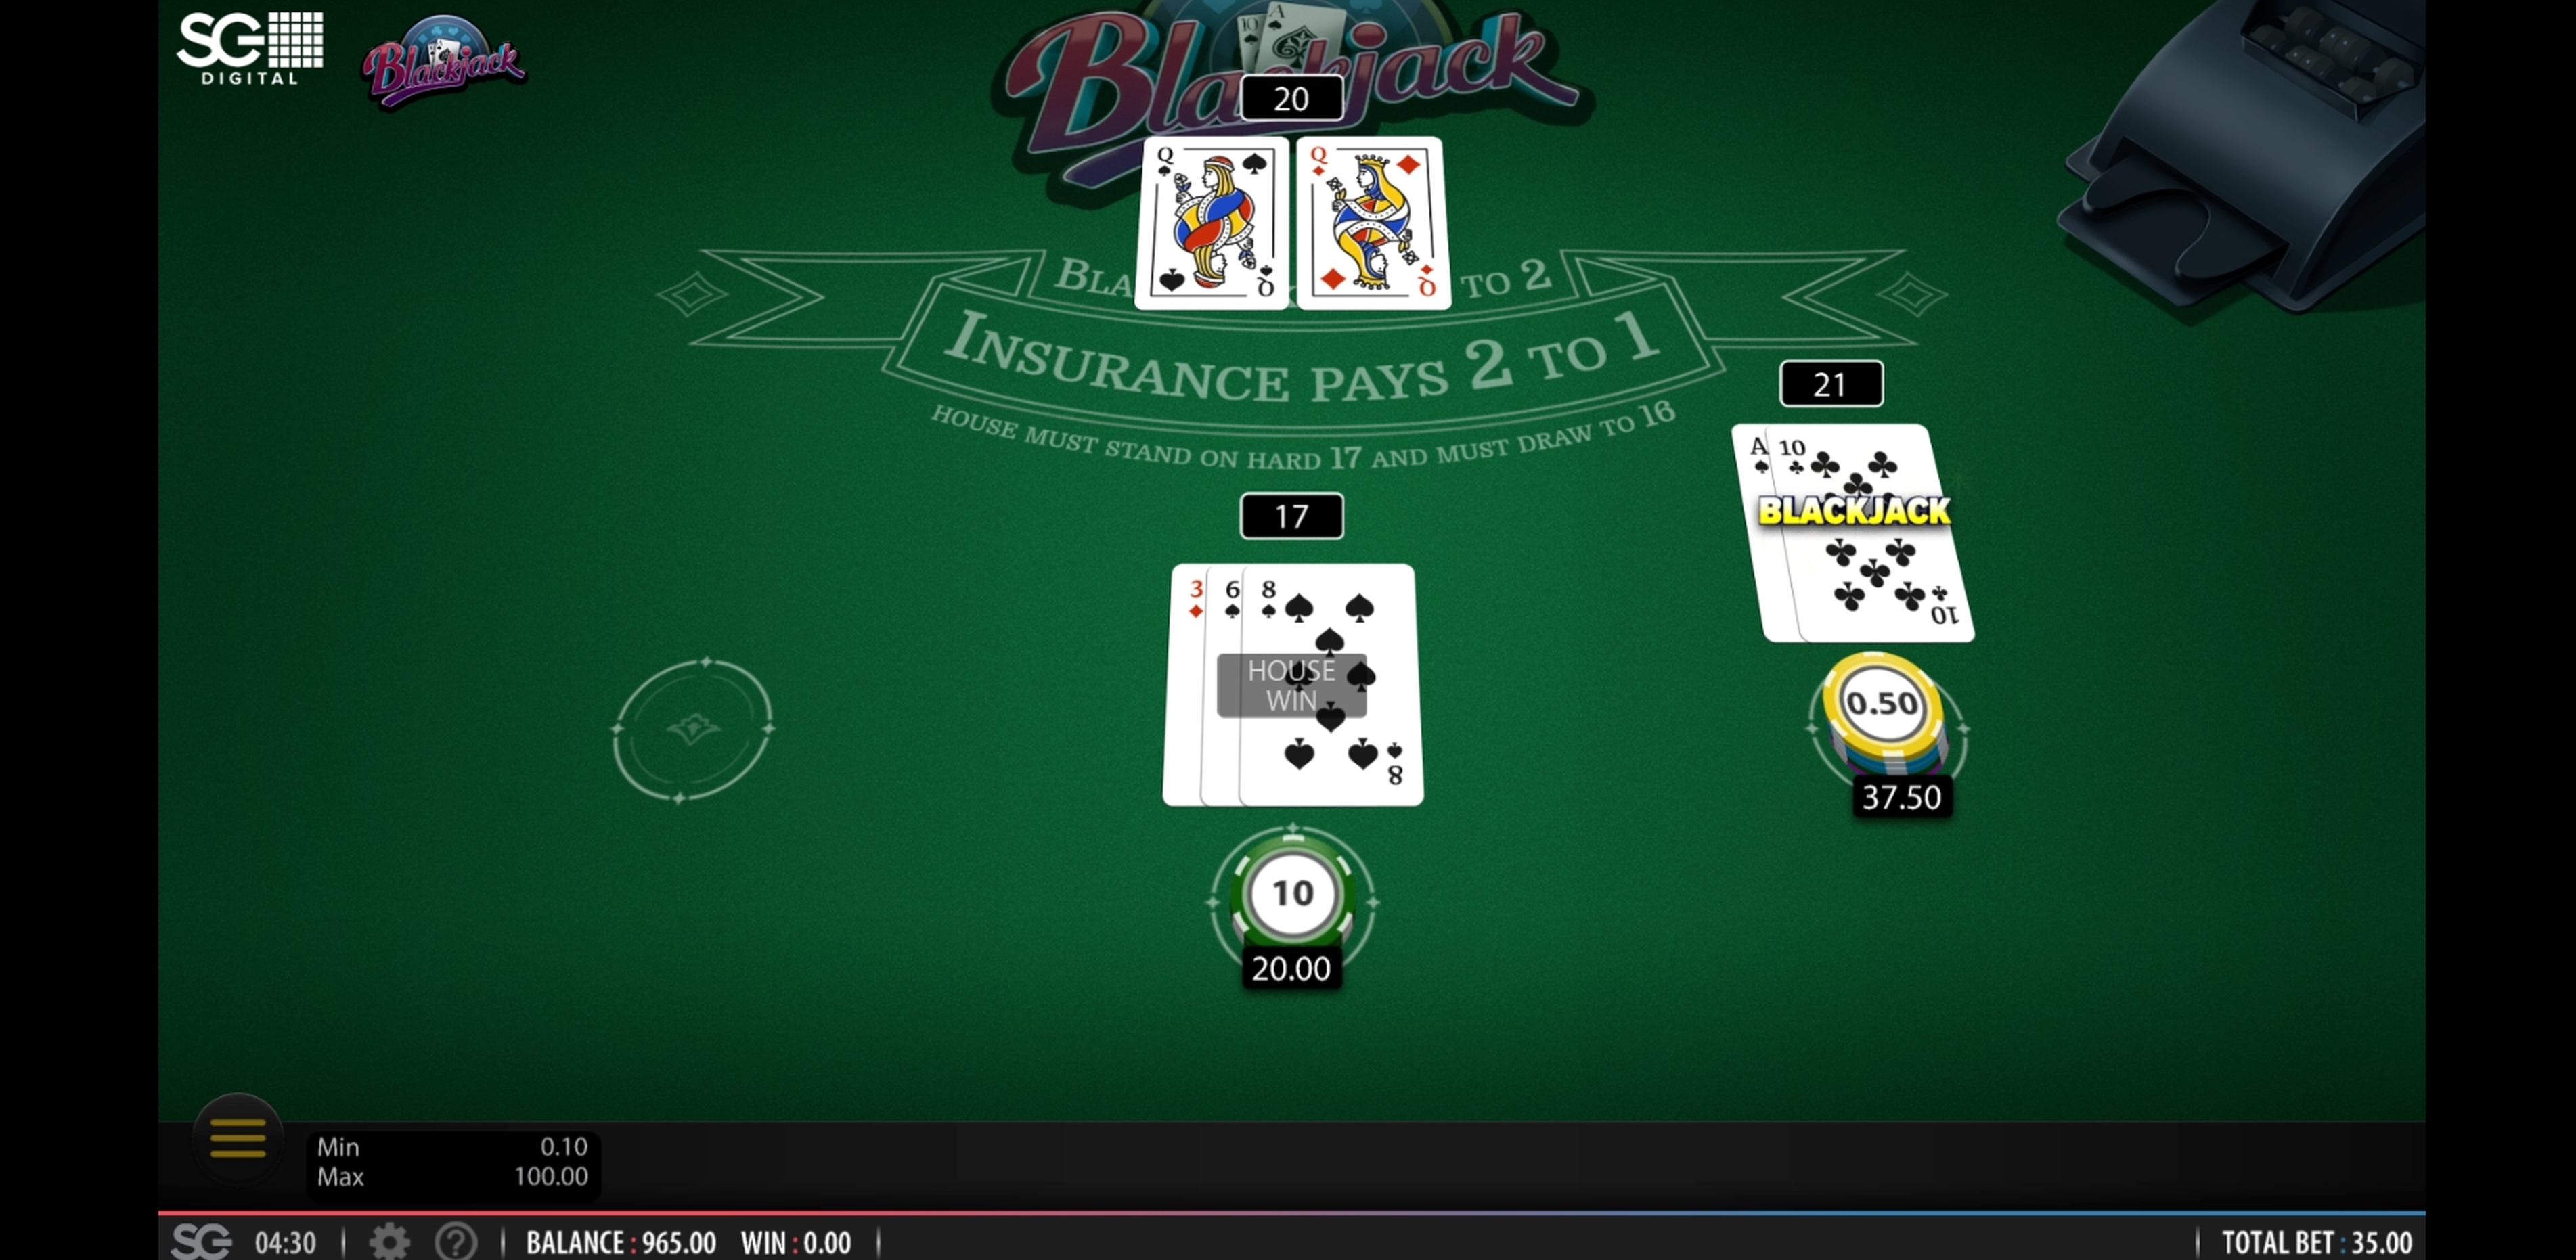 Win Money in Blackjack Free Slot Game by Shuffle Master